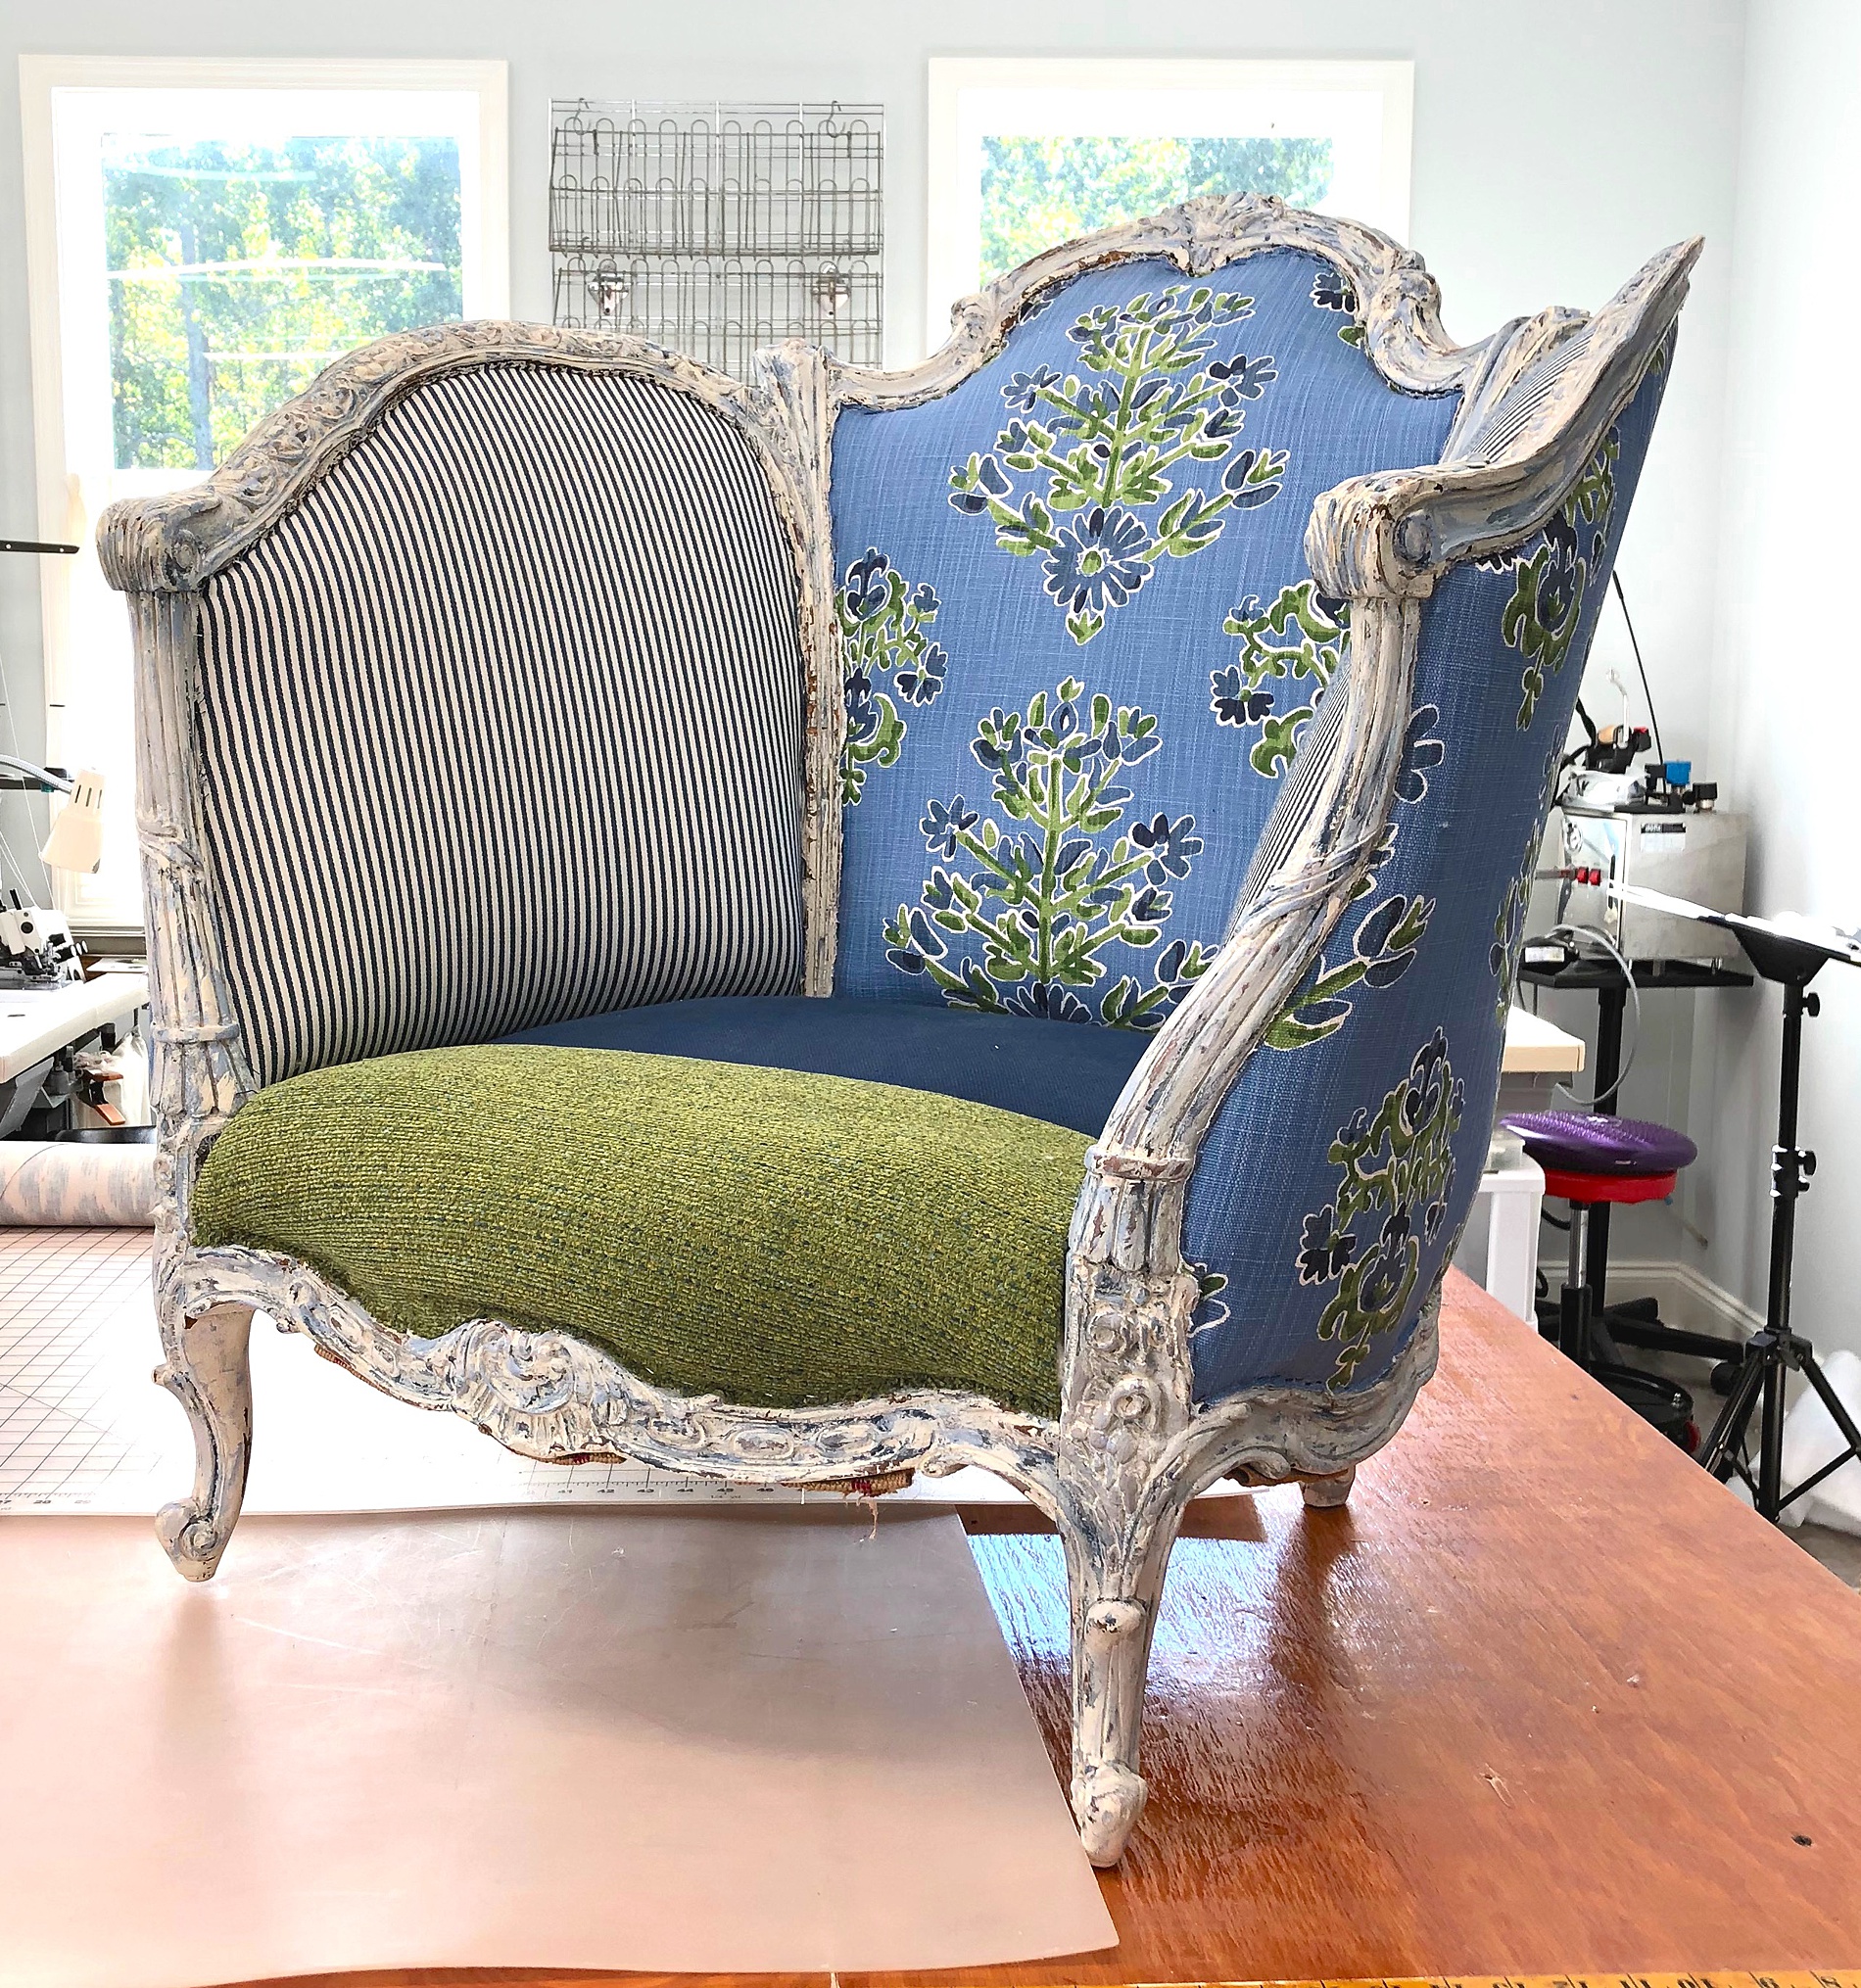 Mixing fabrics on reupholstered furniture to add personality